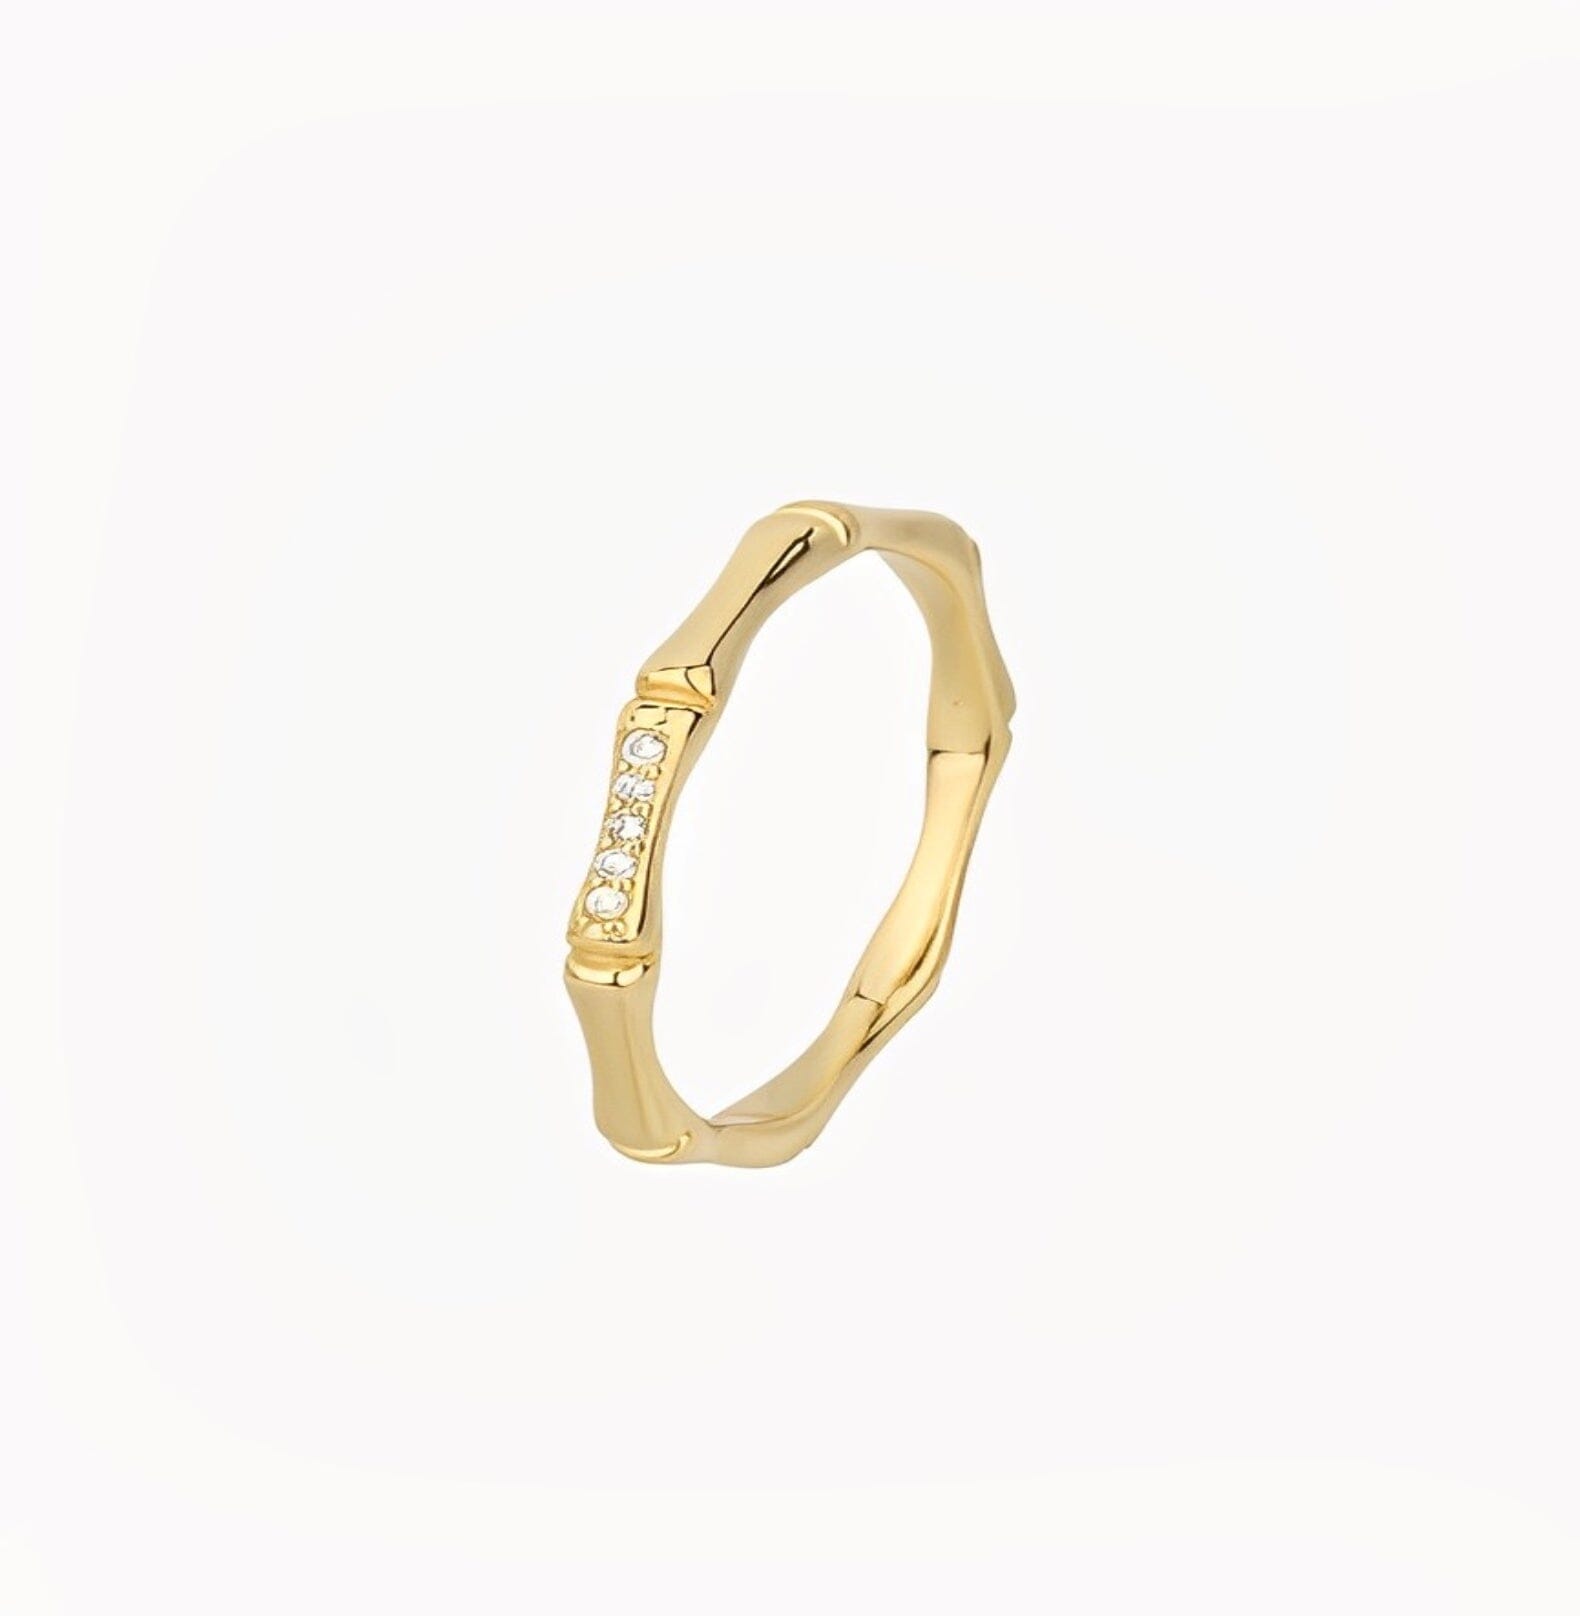 BONE KNOT RING ring Yubama Jewelry Online Store - The Elegant Designs of Gold and Silver ! 